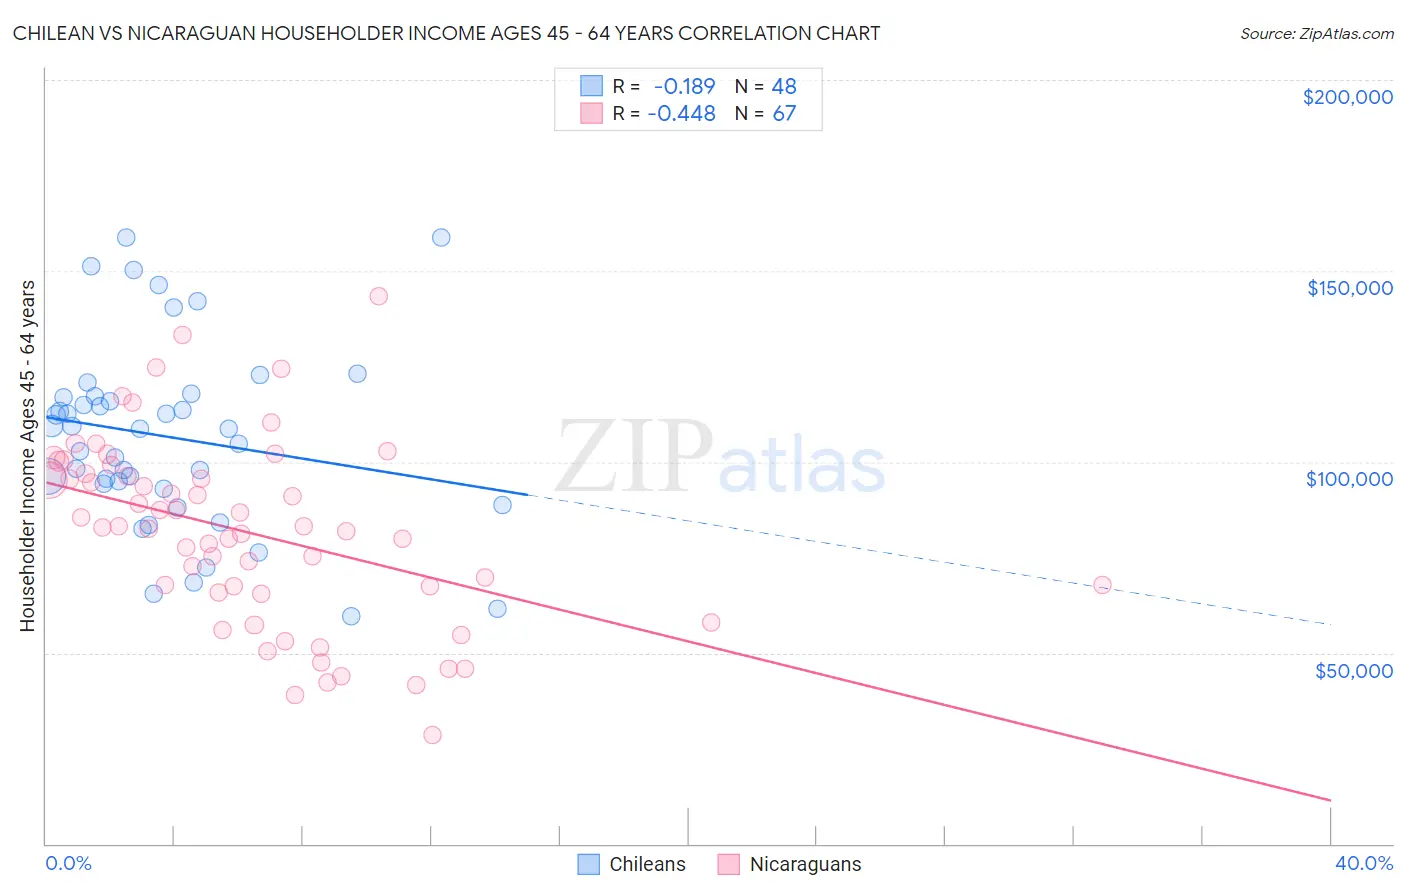 Chilean vs Nicaraguan Householder Income Ages 45 - 64 years